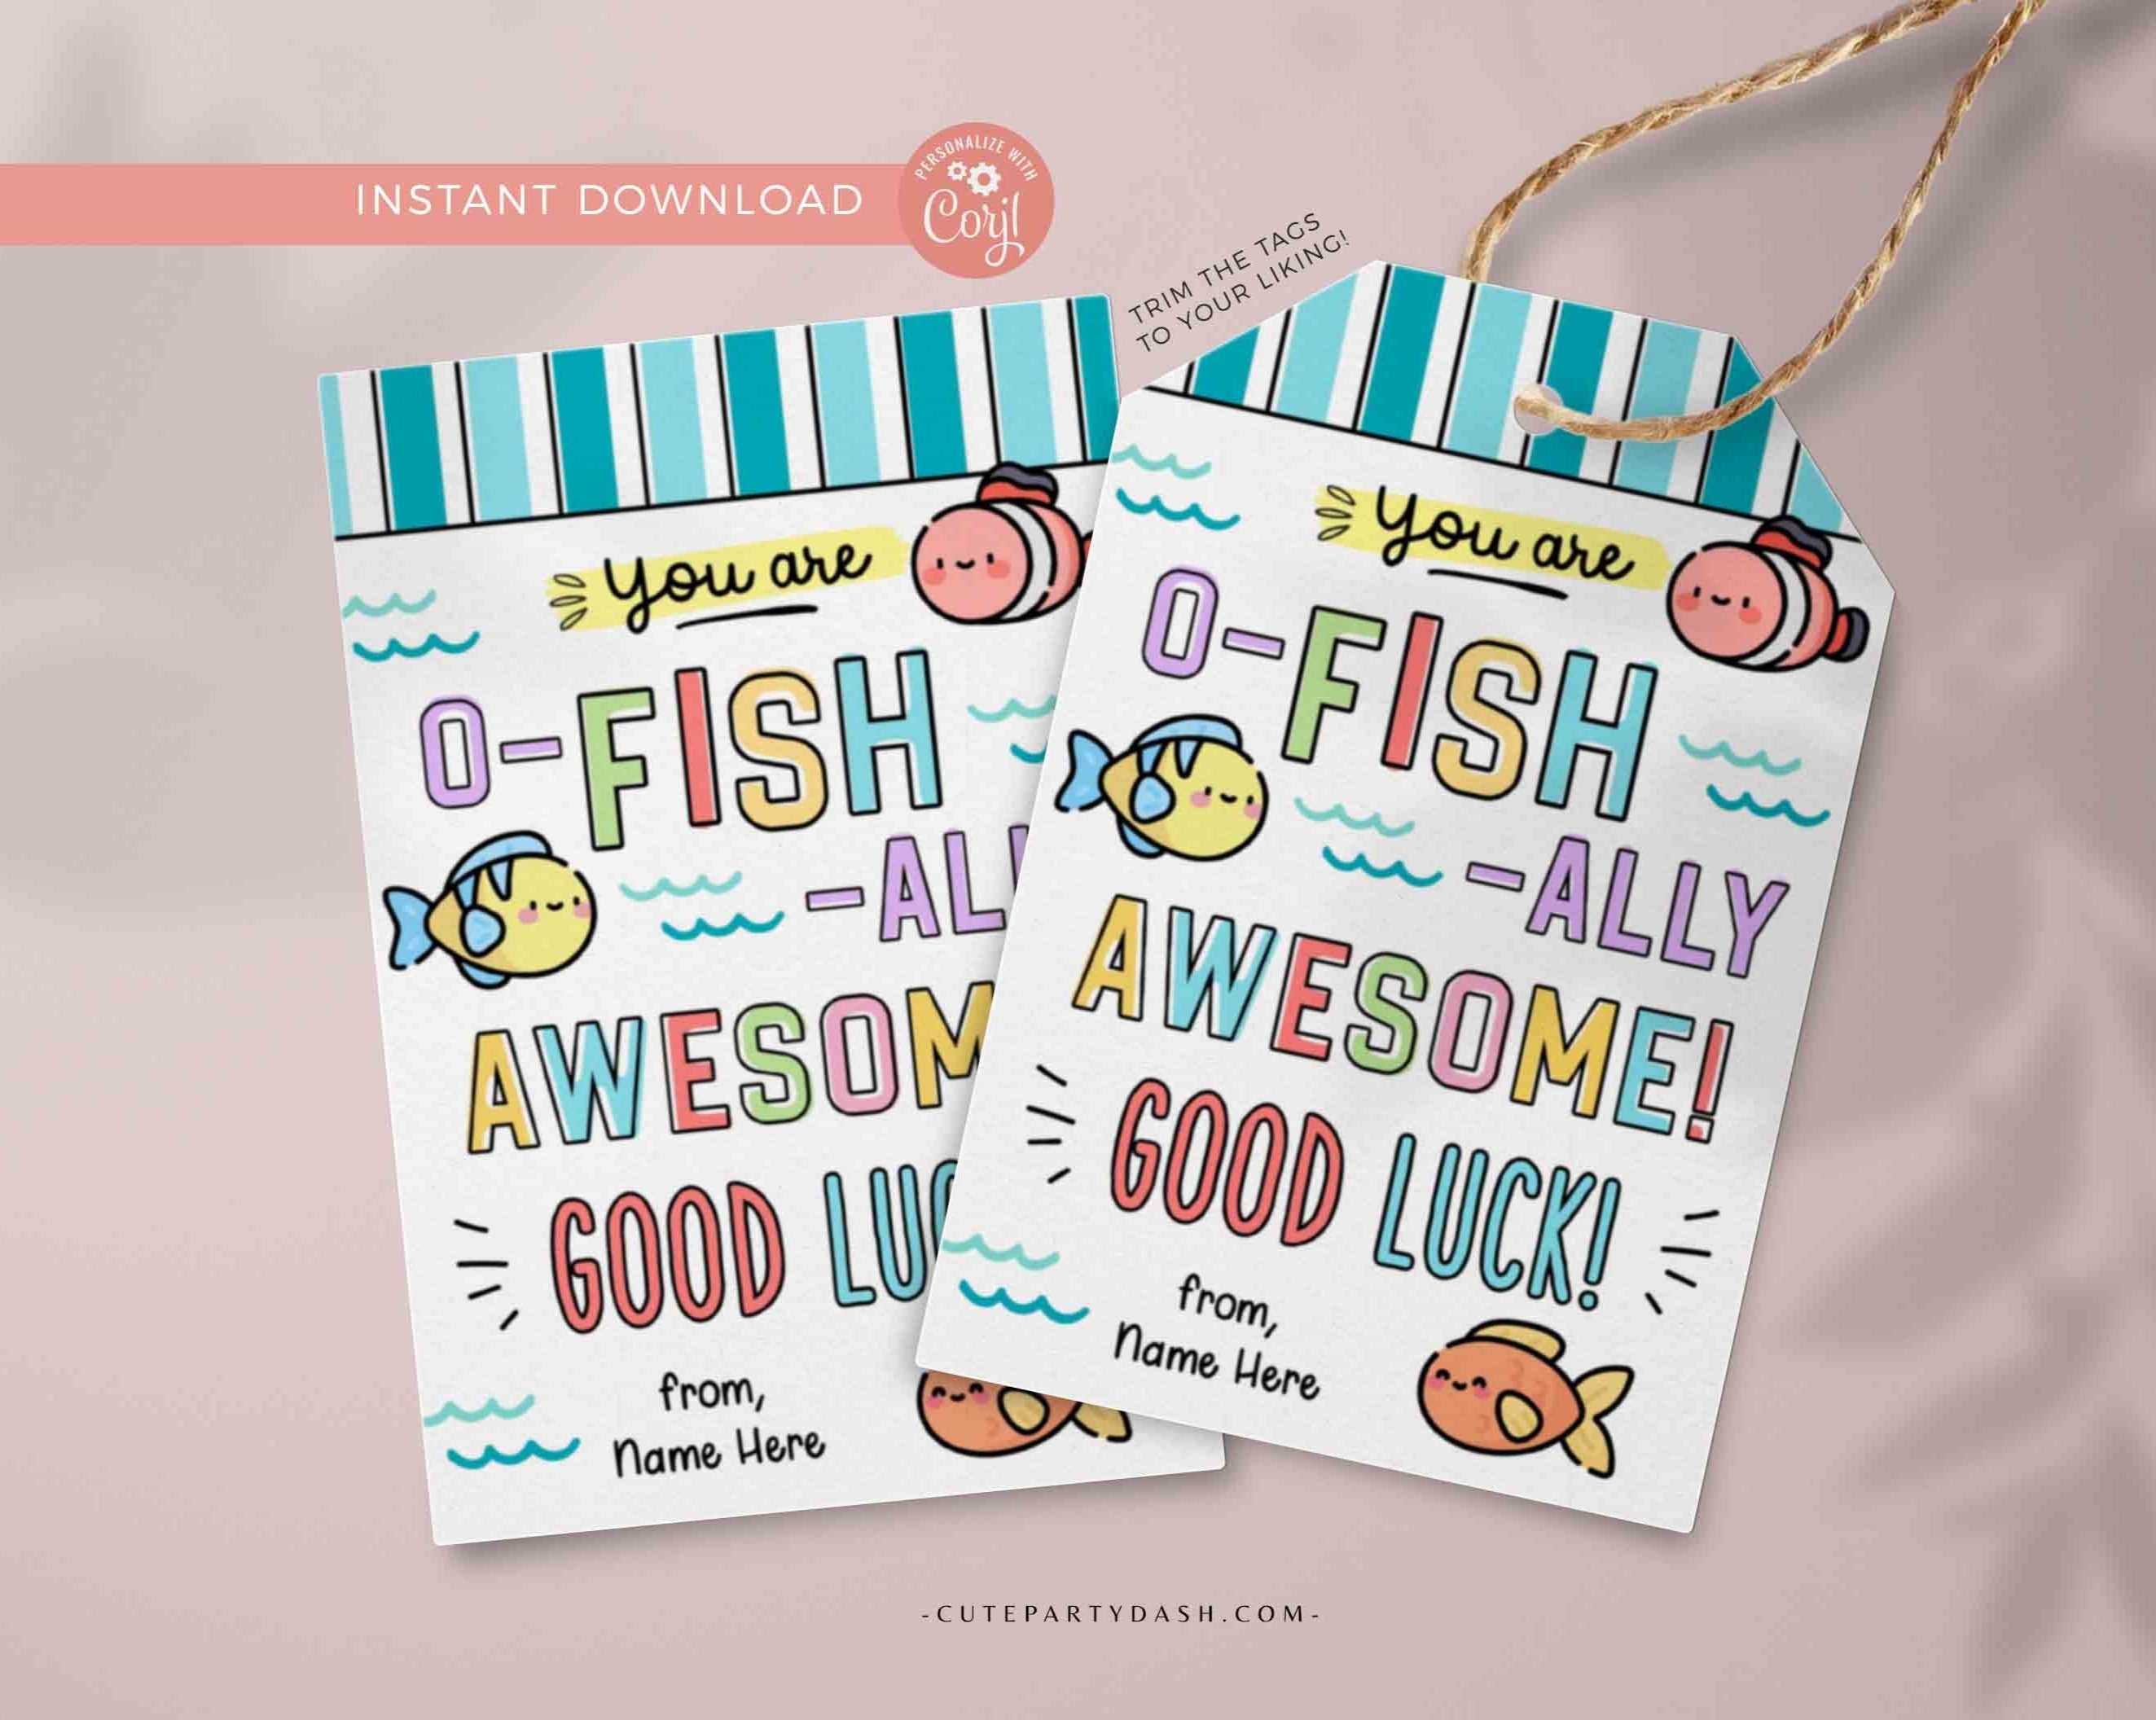 O-fish-ally Awesome Good Luck Printable gift Tag – Cute Party Dash